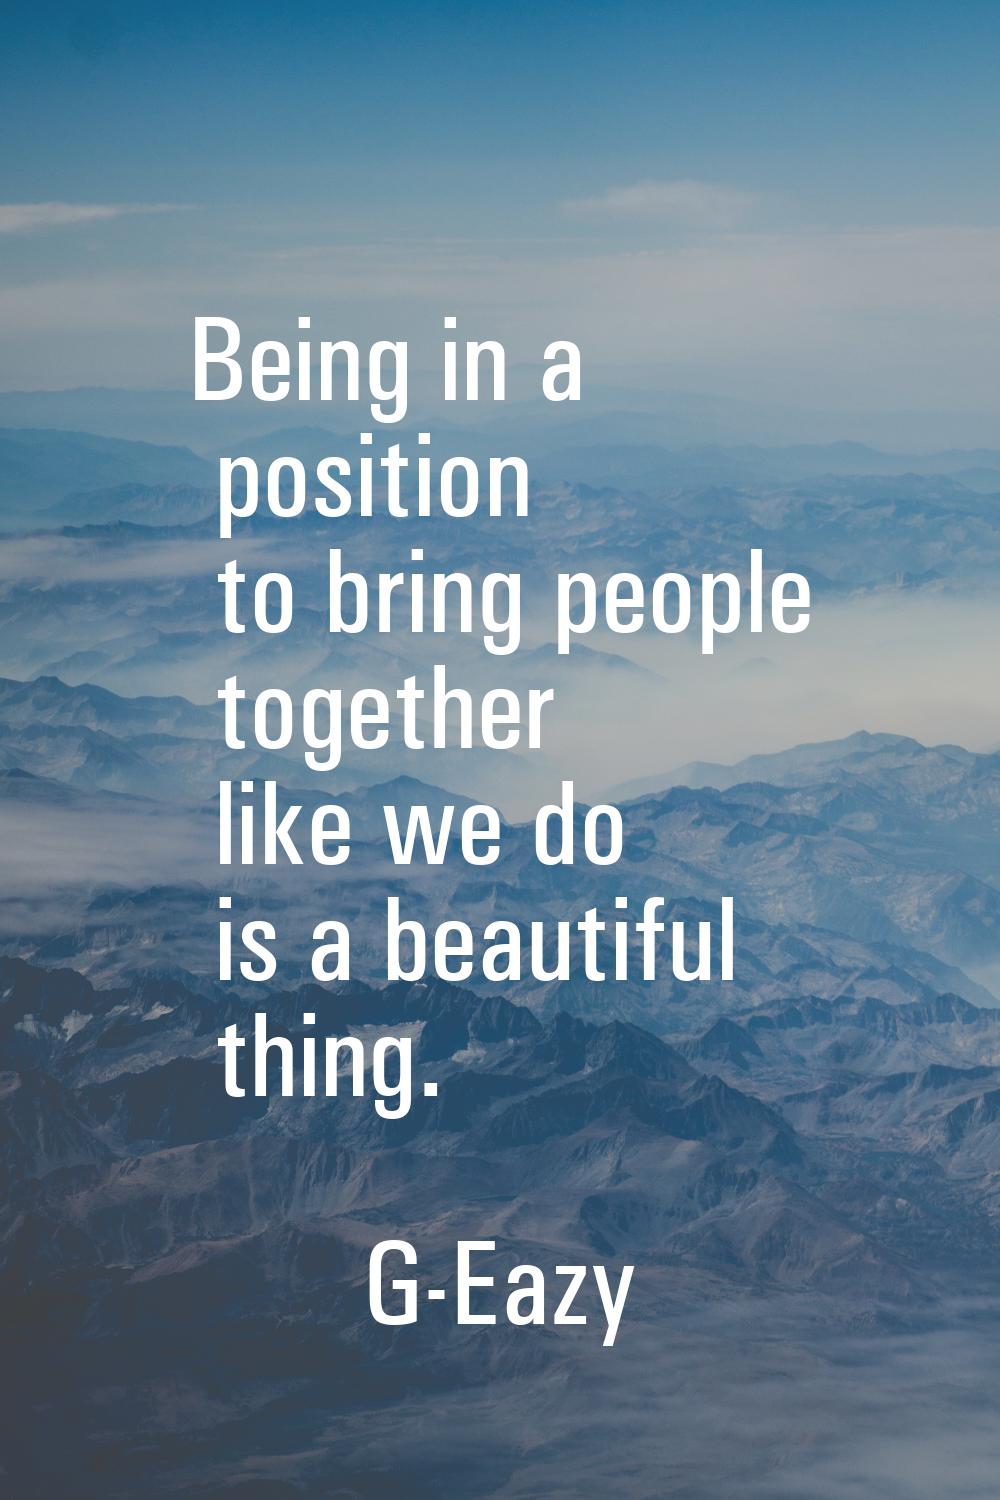 Being in a position to bring people together like we do is a beautiful thing.